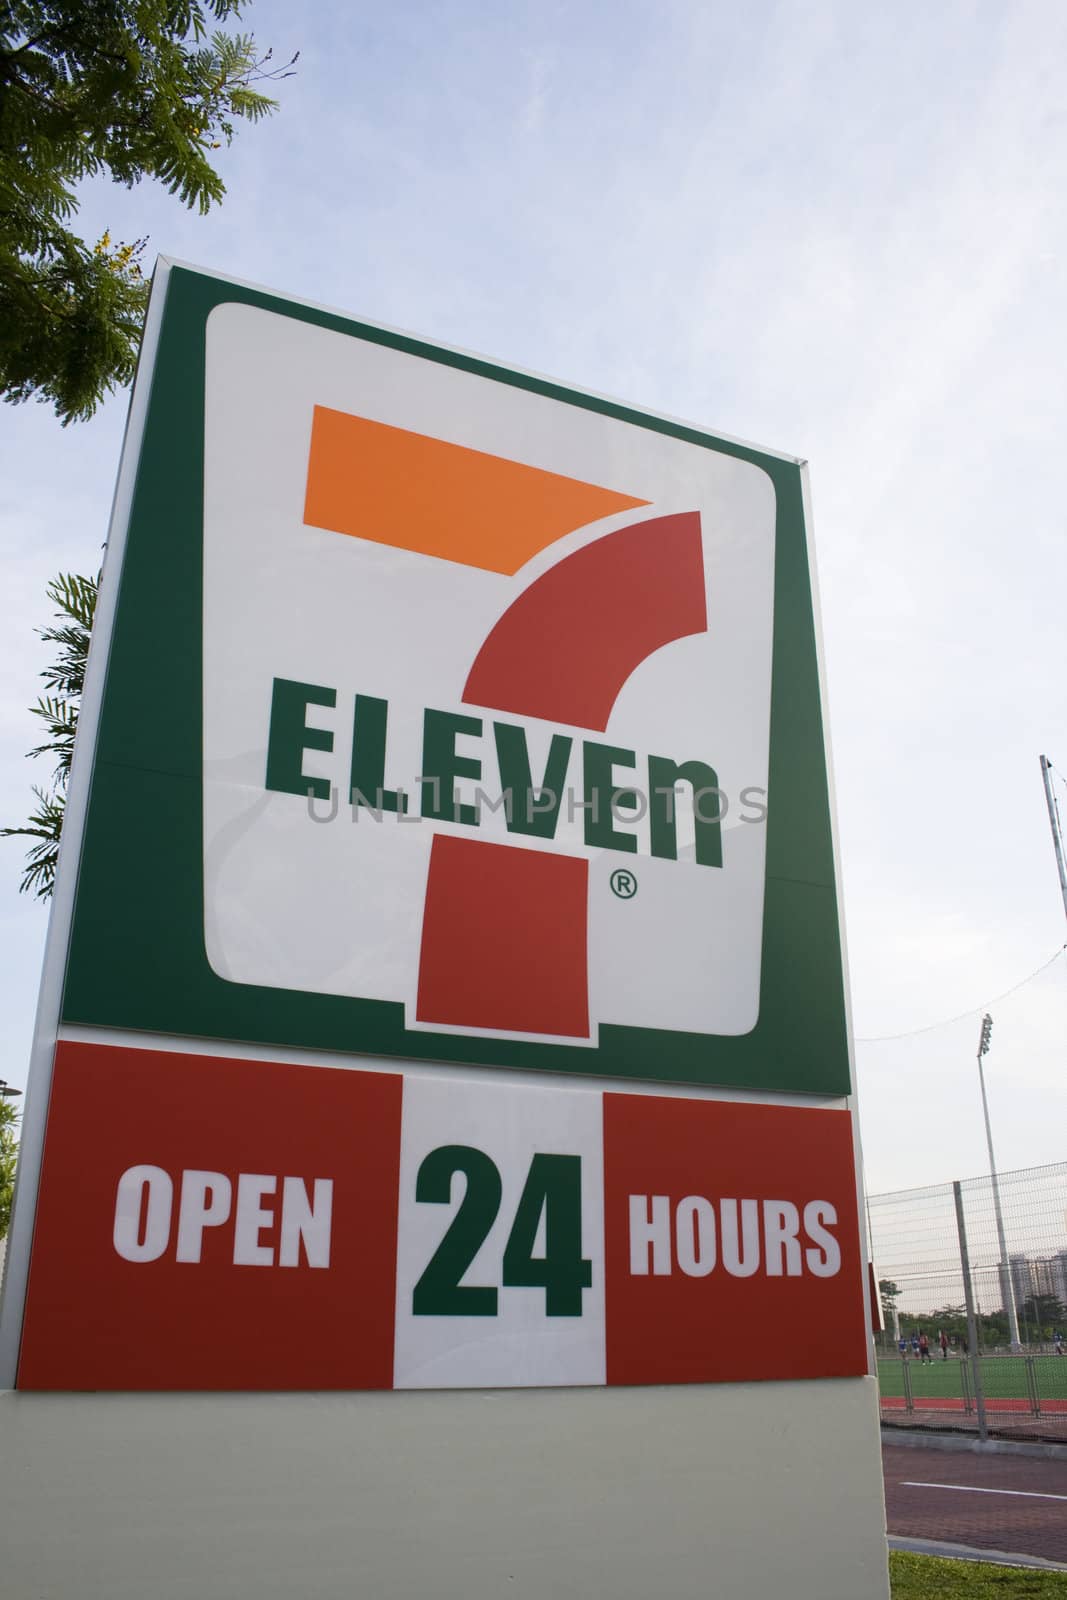 7 Eleven is open 24 hour in most of the Asia country including Singapore.